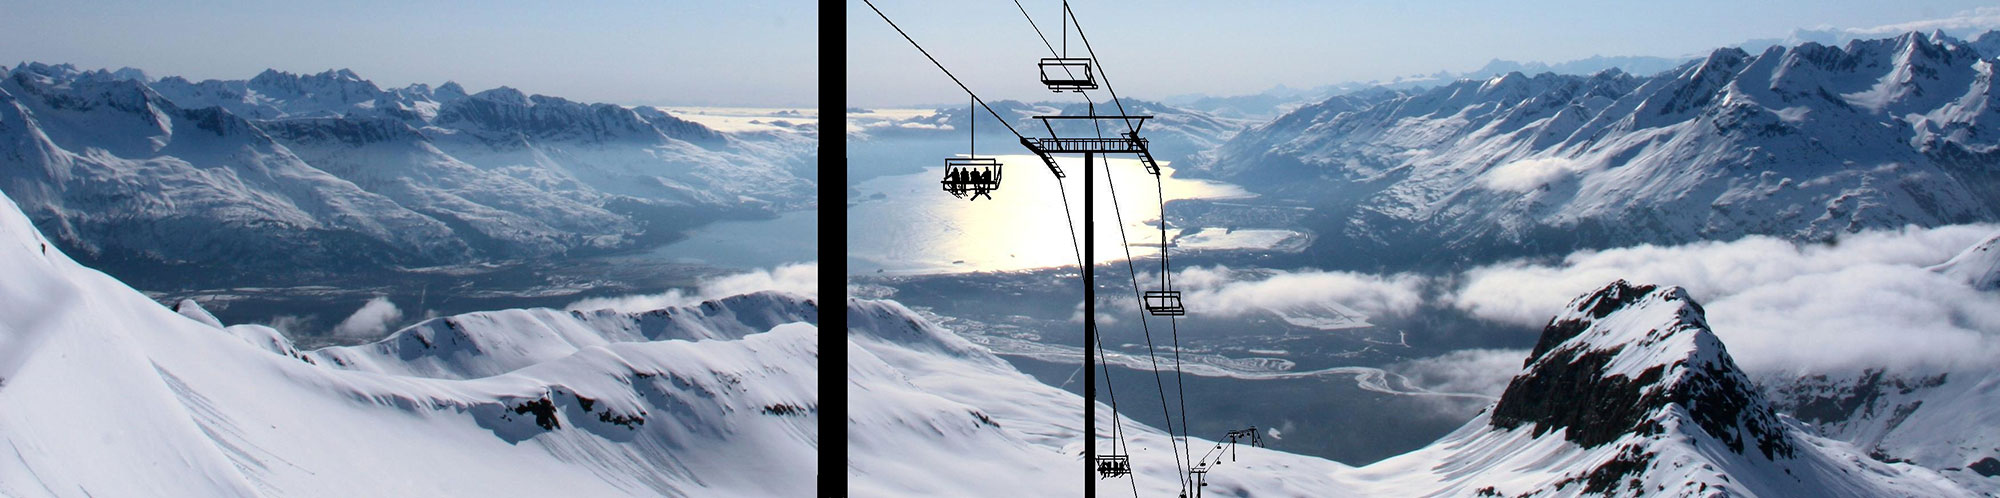 View of mountains and chair lift